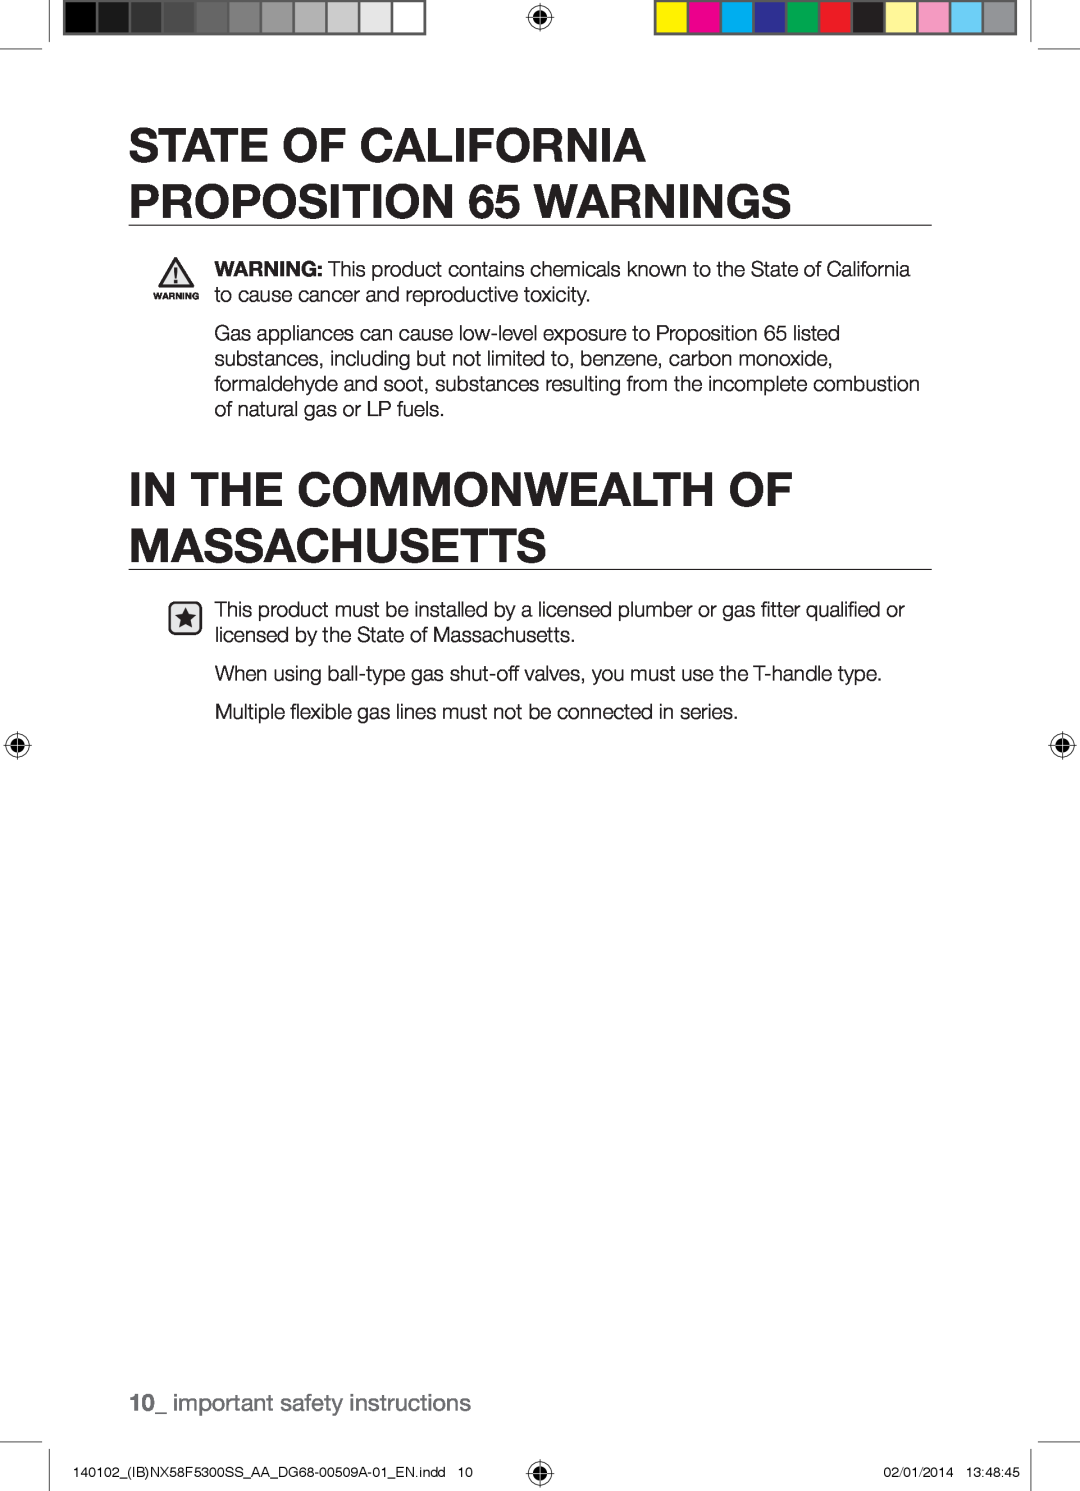 Samsung NX58F5500SW user manual In The Commonwealth Of Massachusetts, STATE OF CALIFORNIA PROPOSITION 65 WARNINGS 